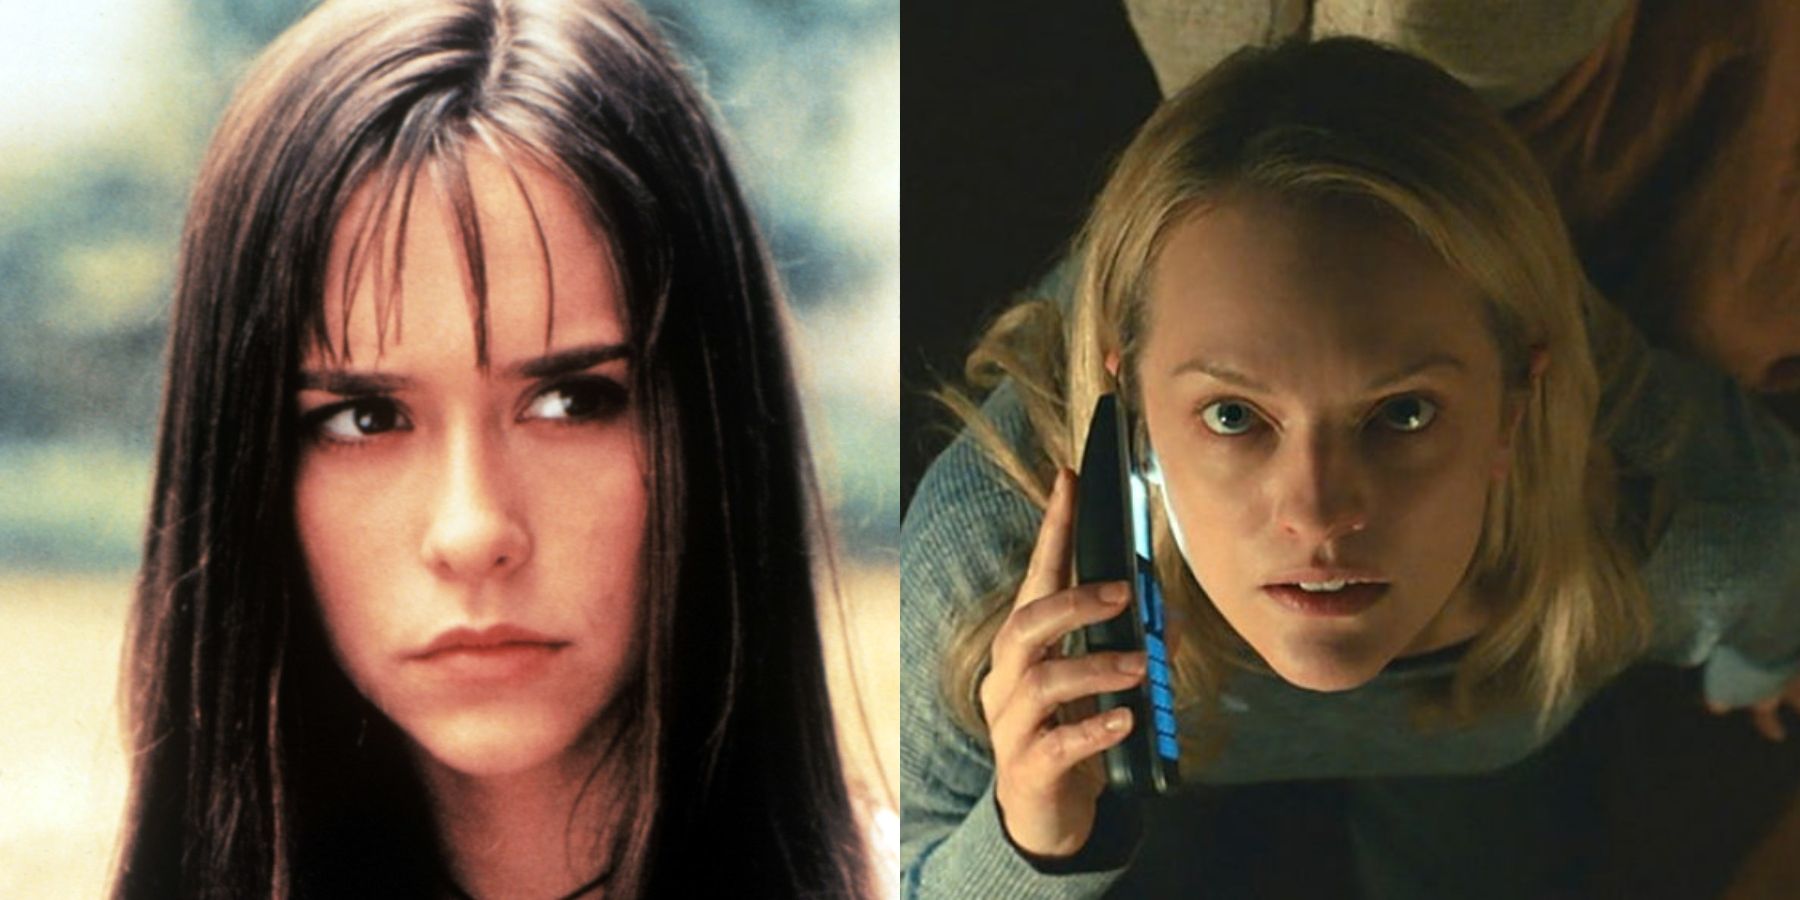 Split image of Julie James (Jennifer Love Hewitt) in I Know What You Did Last Summer and Cecilia Kass (Elizabeth Moss) in The Invisible Man